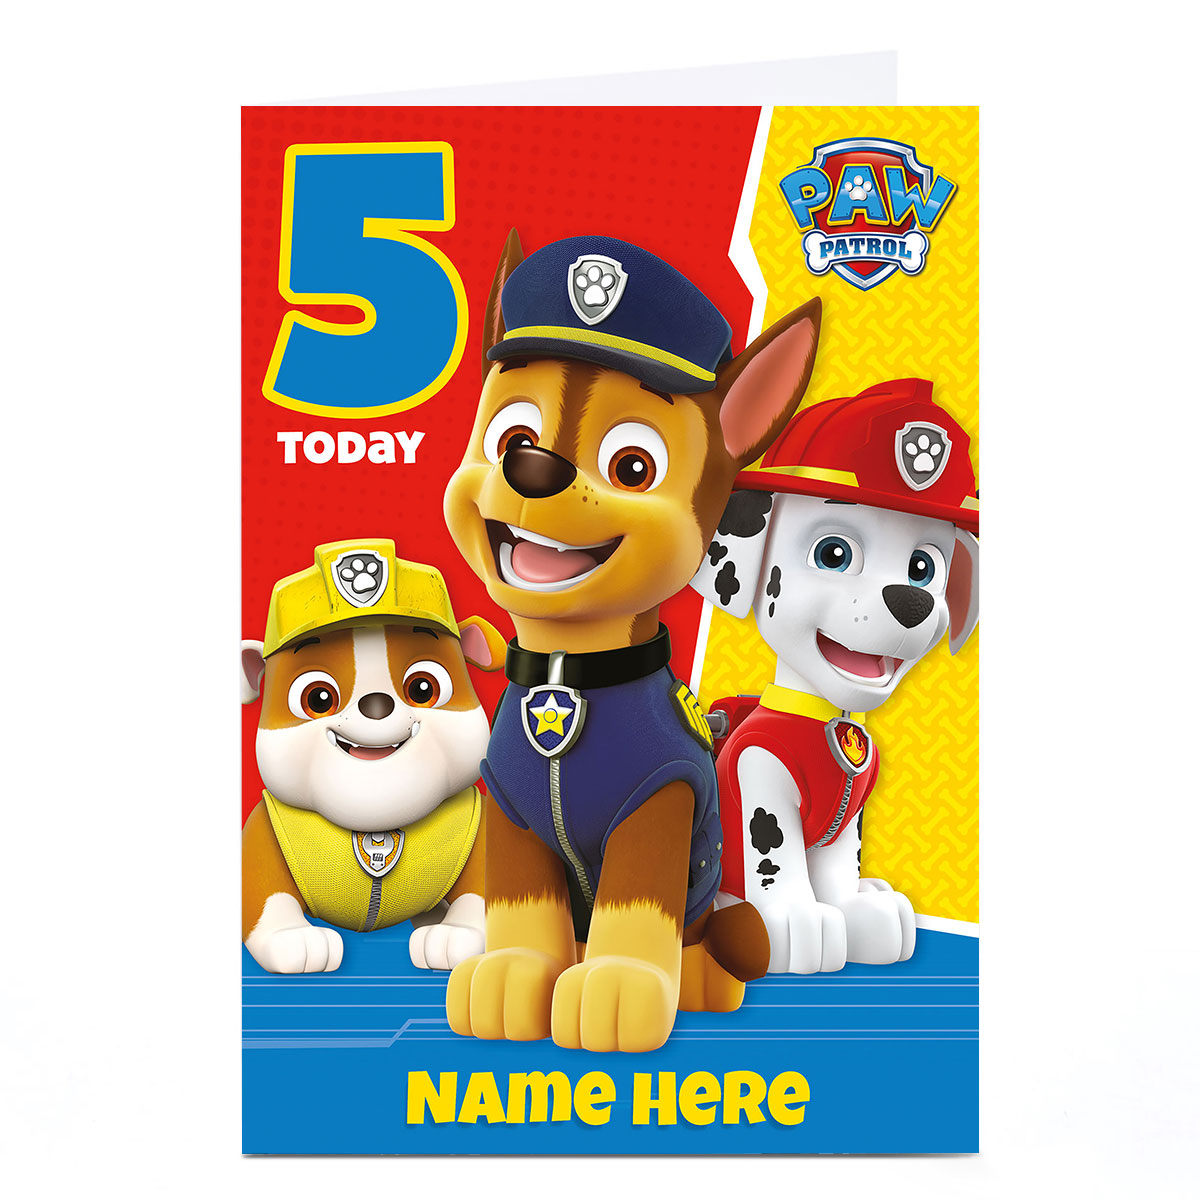 Personalised Paw Patrol Card - 5 Today